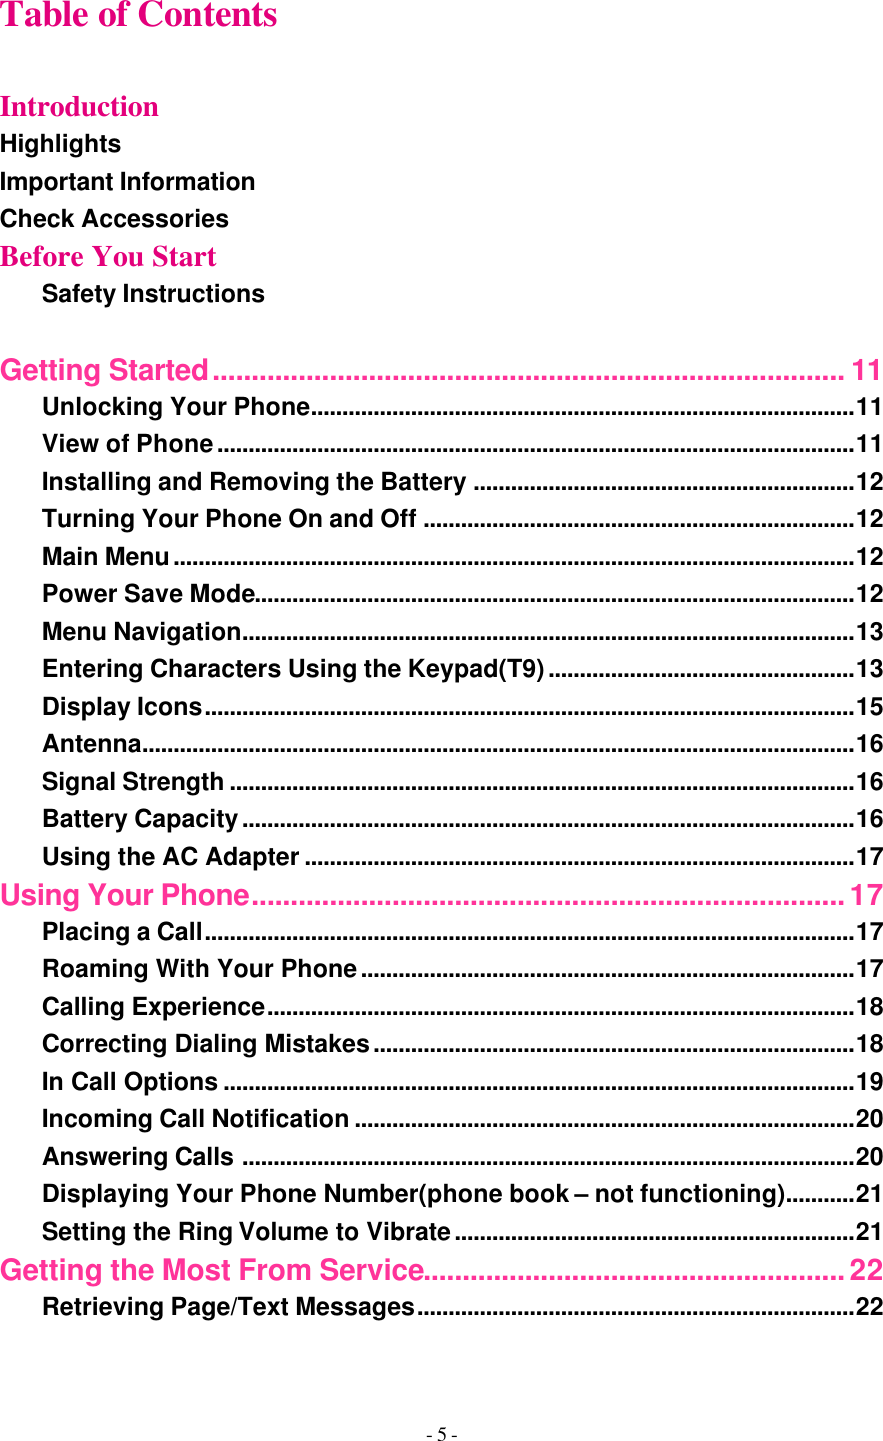 - 5 - Table of Contents  Introduction Highlights Important Information Check Accessories Before You Start Safety Instructions  Getting Started................................................................................. 11 Unlocking Your Phone.......................................................................................11 View of Phone......................................................................................................11 Installing and Removing the Battery .............................................................12 Turning Your Phone On and Off .....................................................................12 Main Menu.............................................................................................................12 Power Save Mode................................................................................................12 Menu Navigation..................................................................................................13 Entering Characters Using the Keypad(T9).................................................13 Display Icons........................................................................................................15 Antenna..................................................................................................................16 Signal Strength ....................................................................................................16 Battery Capacity..................................................................................................16 Using the AC Adapter ........................................................................................17 Using Your Phone............................................................................17 Placing a Call........................................................................................................17 Roaming With Your Phone...............................................................................17 Calling Experience..............................................................................................18 Correcting Dialing Mistakes.............................................................................18 In Call Options .....................................................................................................19 Incoming Call Notification ................................................................................20 Answering Calls ..................................................................................................20 Displaying Your Phone Number(phone book – not functioning)...........21 Setting the Ring Volume to Vibrate................................................................21 Getting the Most From Service......................................................22 Retrieving Page/Text Messages......................................................................22 